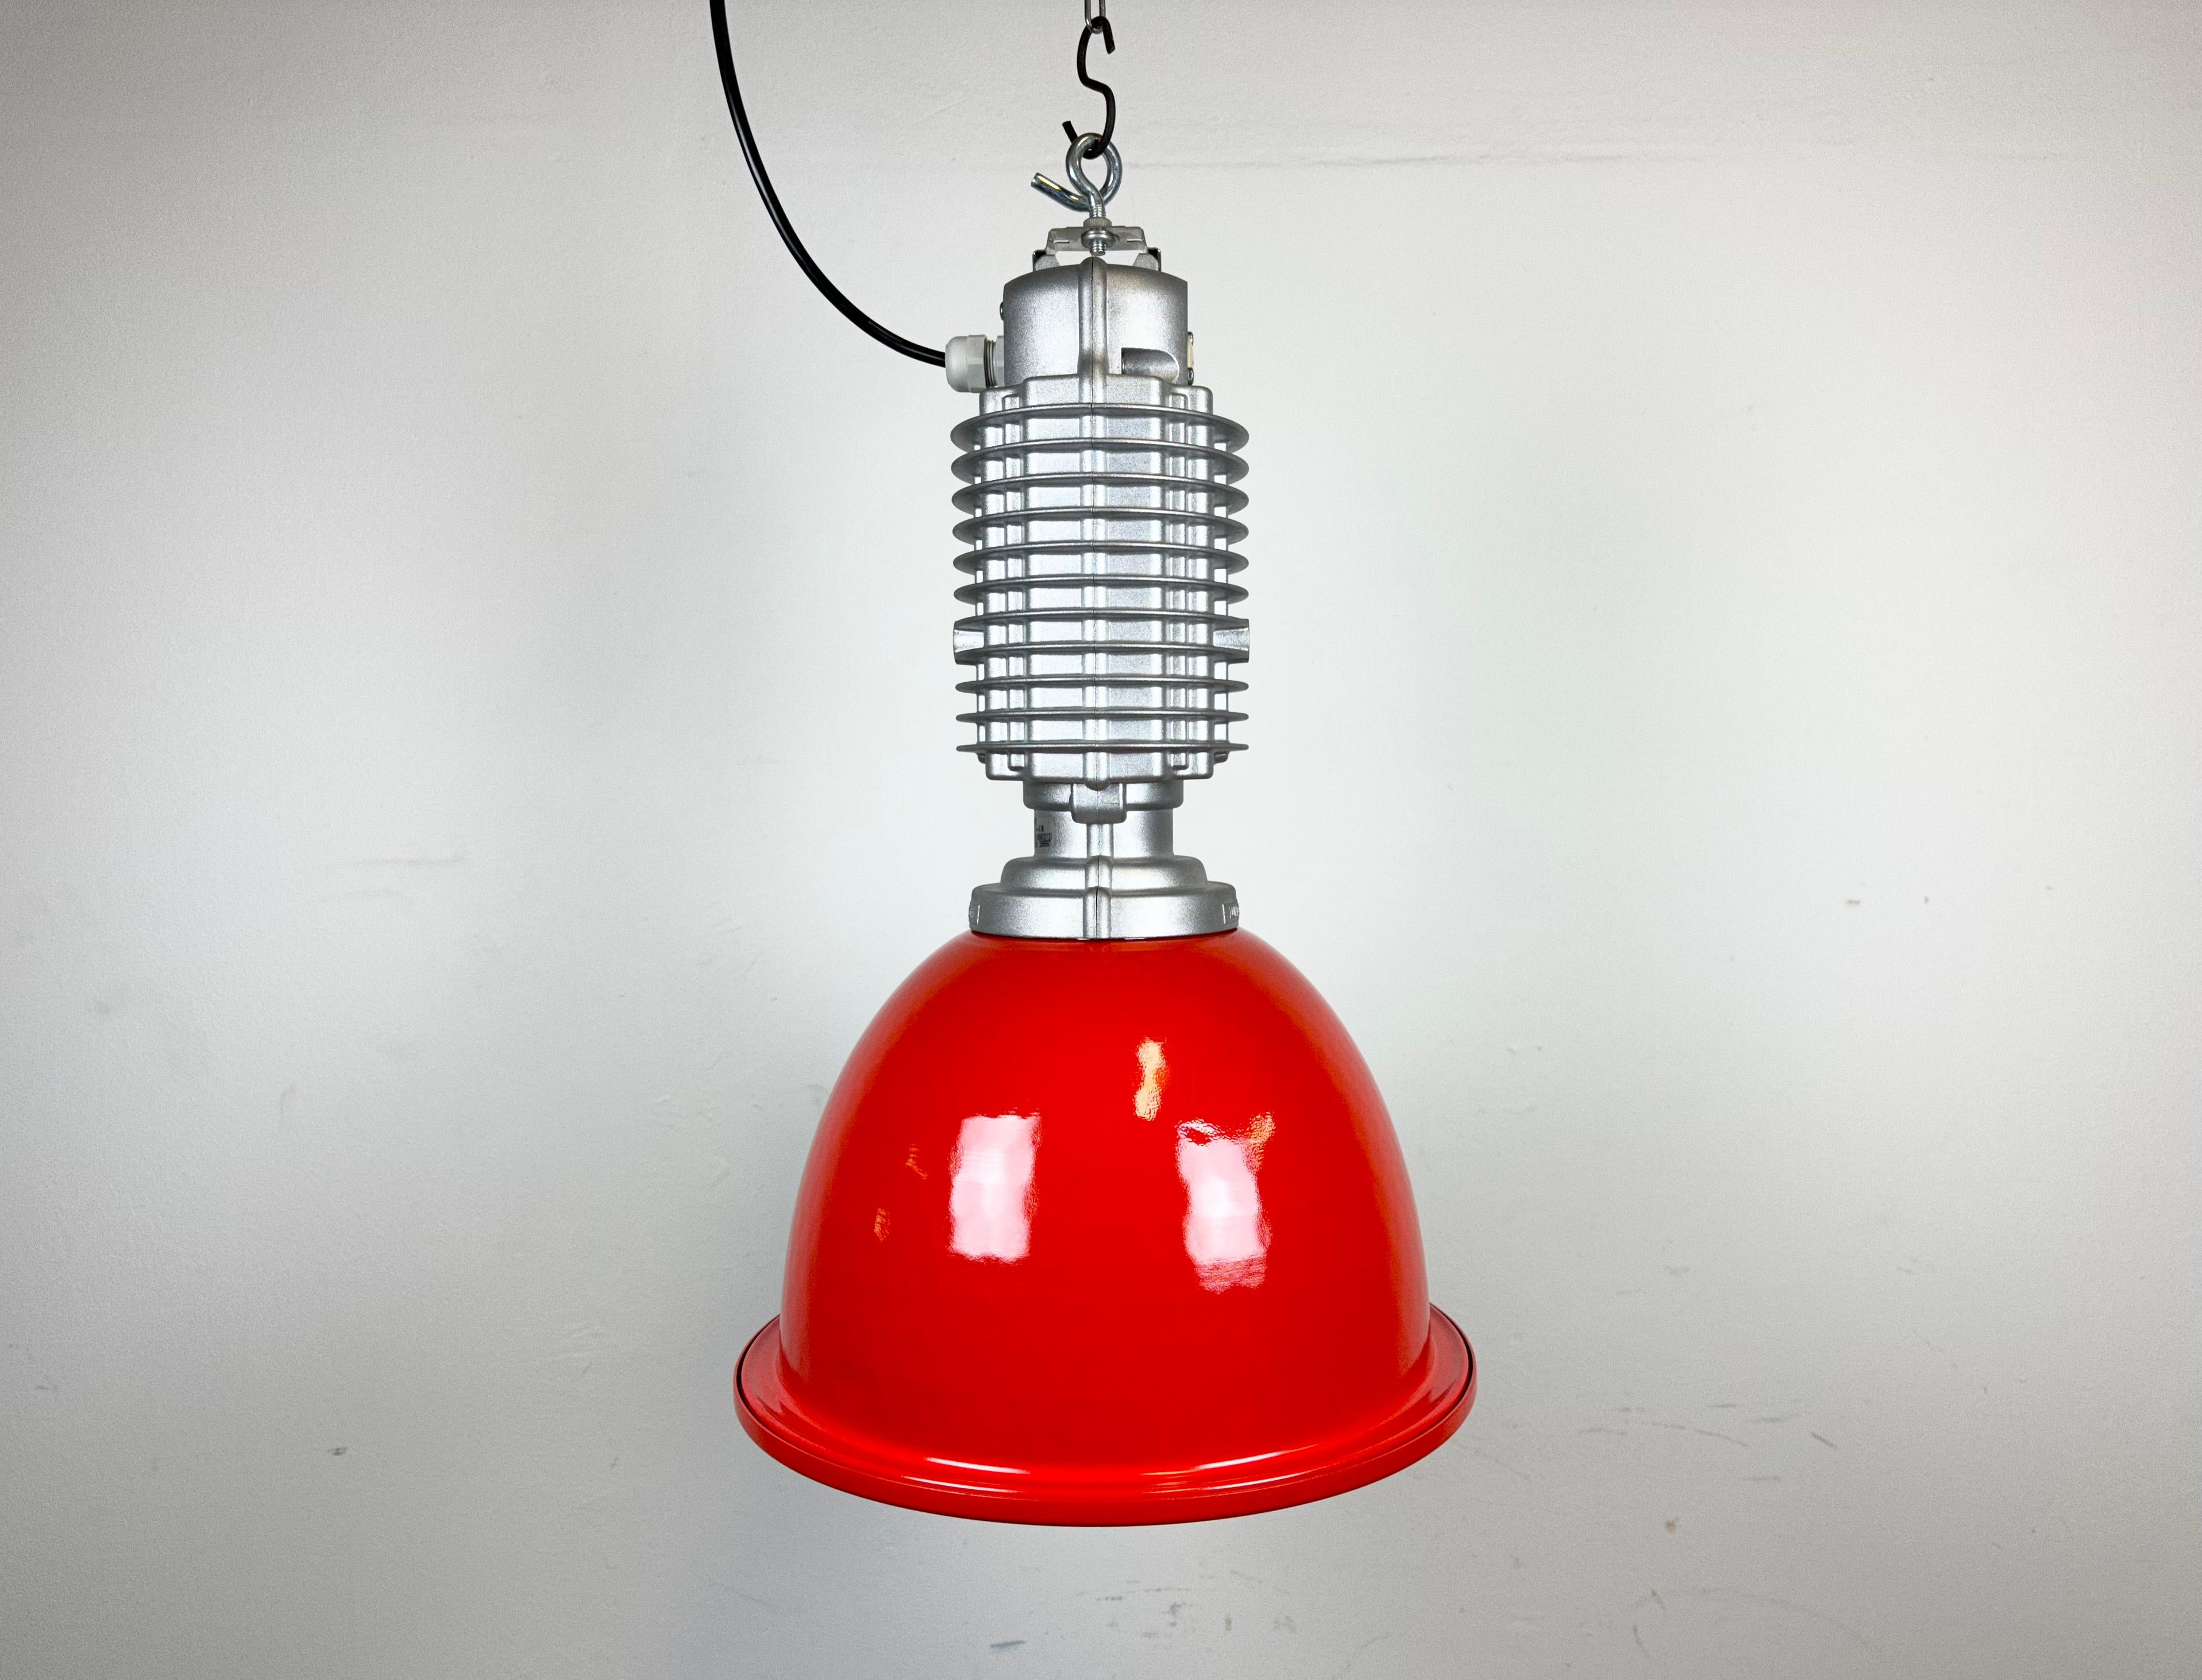 This industrial pendant lamp was designed by Charles Keller for Zumtobel Staff during the 1990s. It features a cast aluminum top and an aluminium shade, newly painted on red. New porcelain socket requires E27/ E26 light bulbs. New wire The diameter